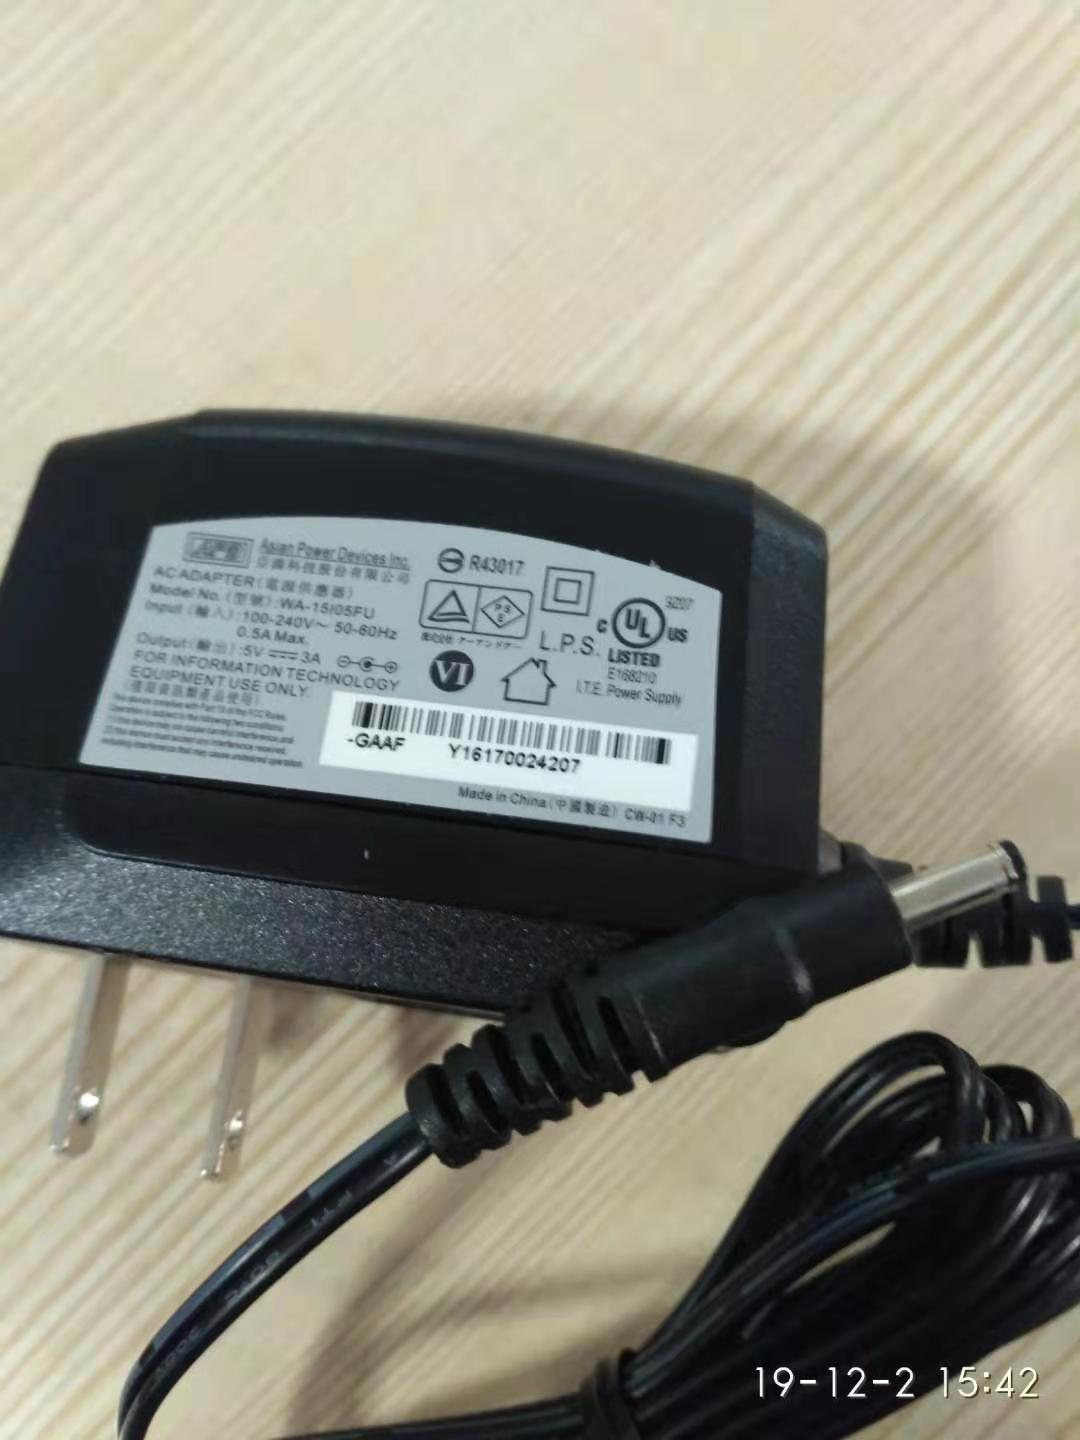 New APD WA-15I05FU 5V 3A AC ADAPTER POWER CHARGER